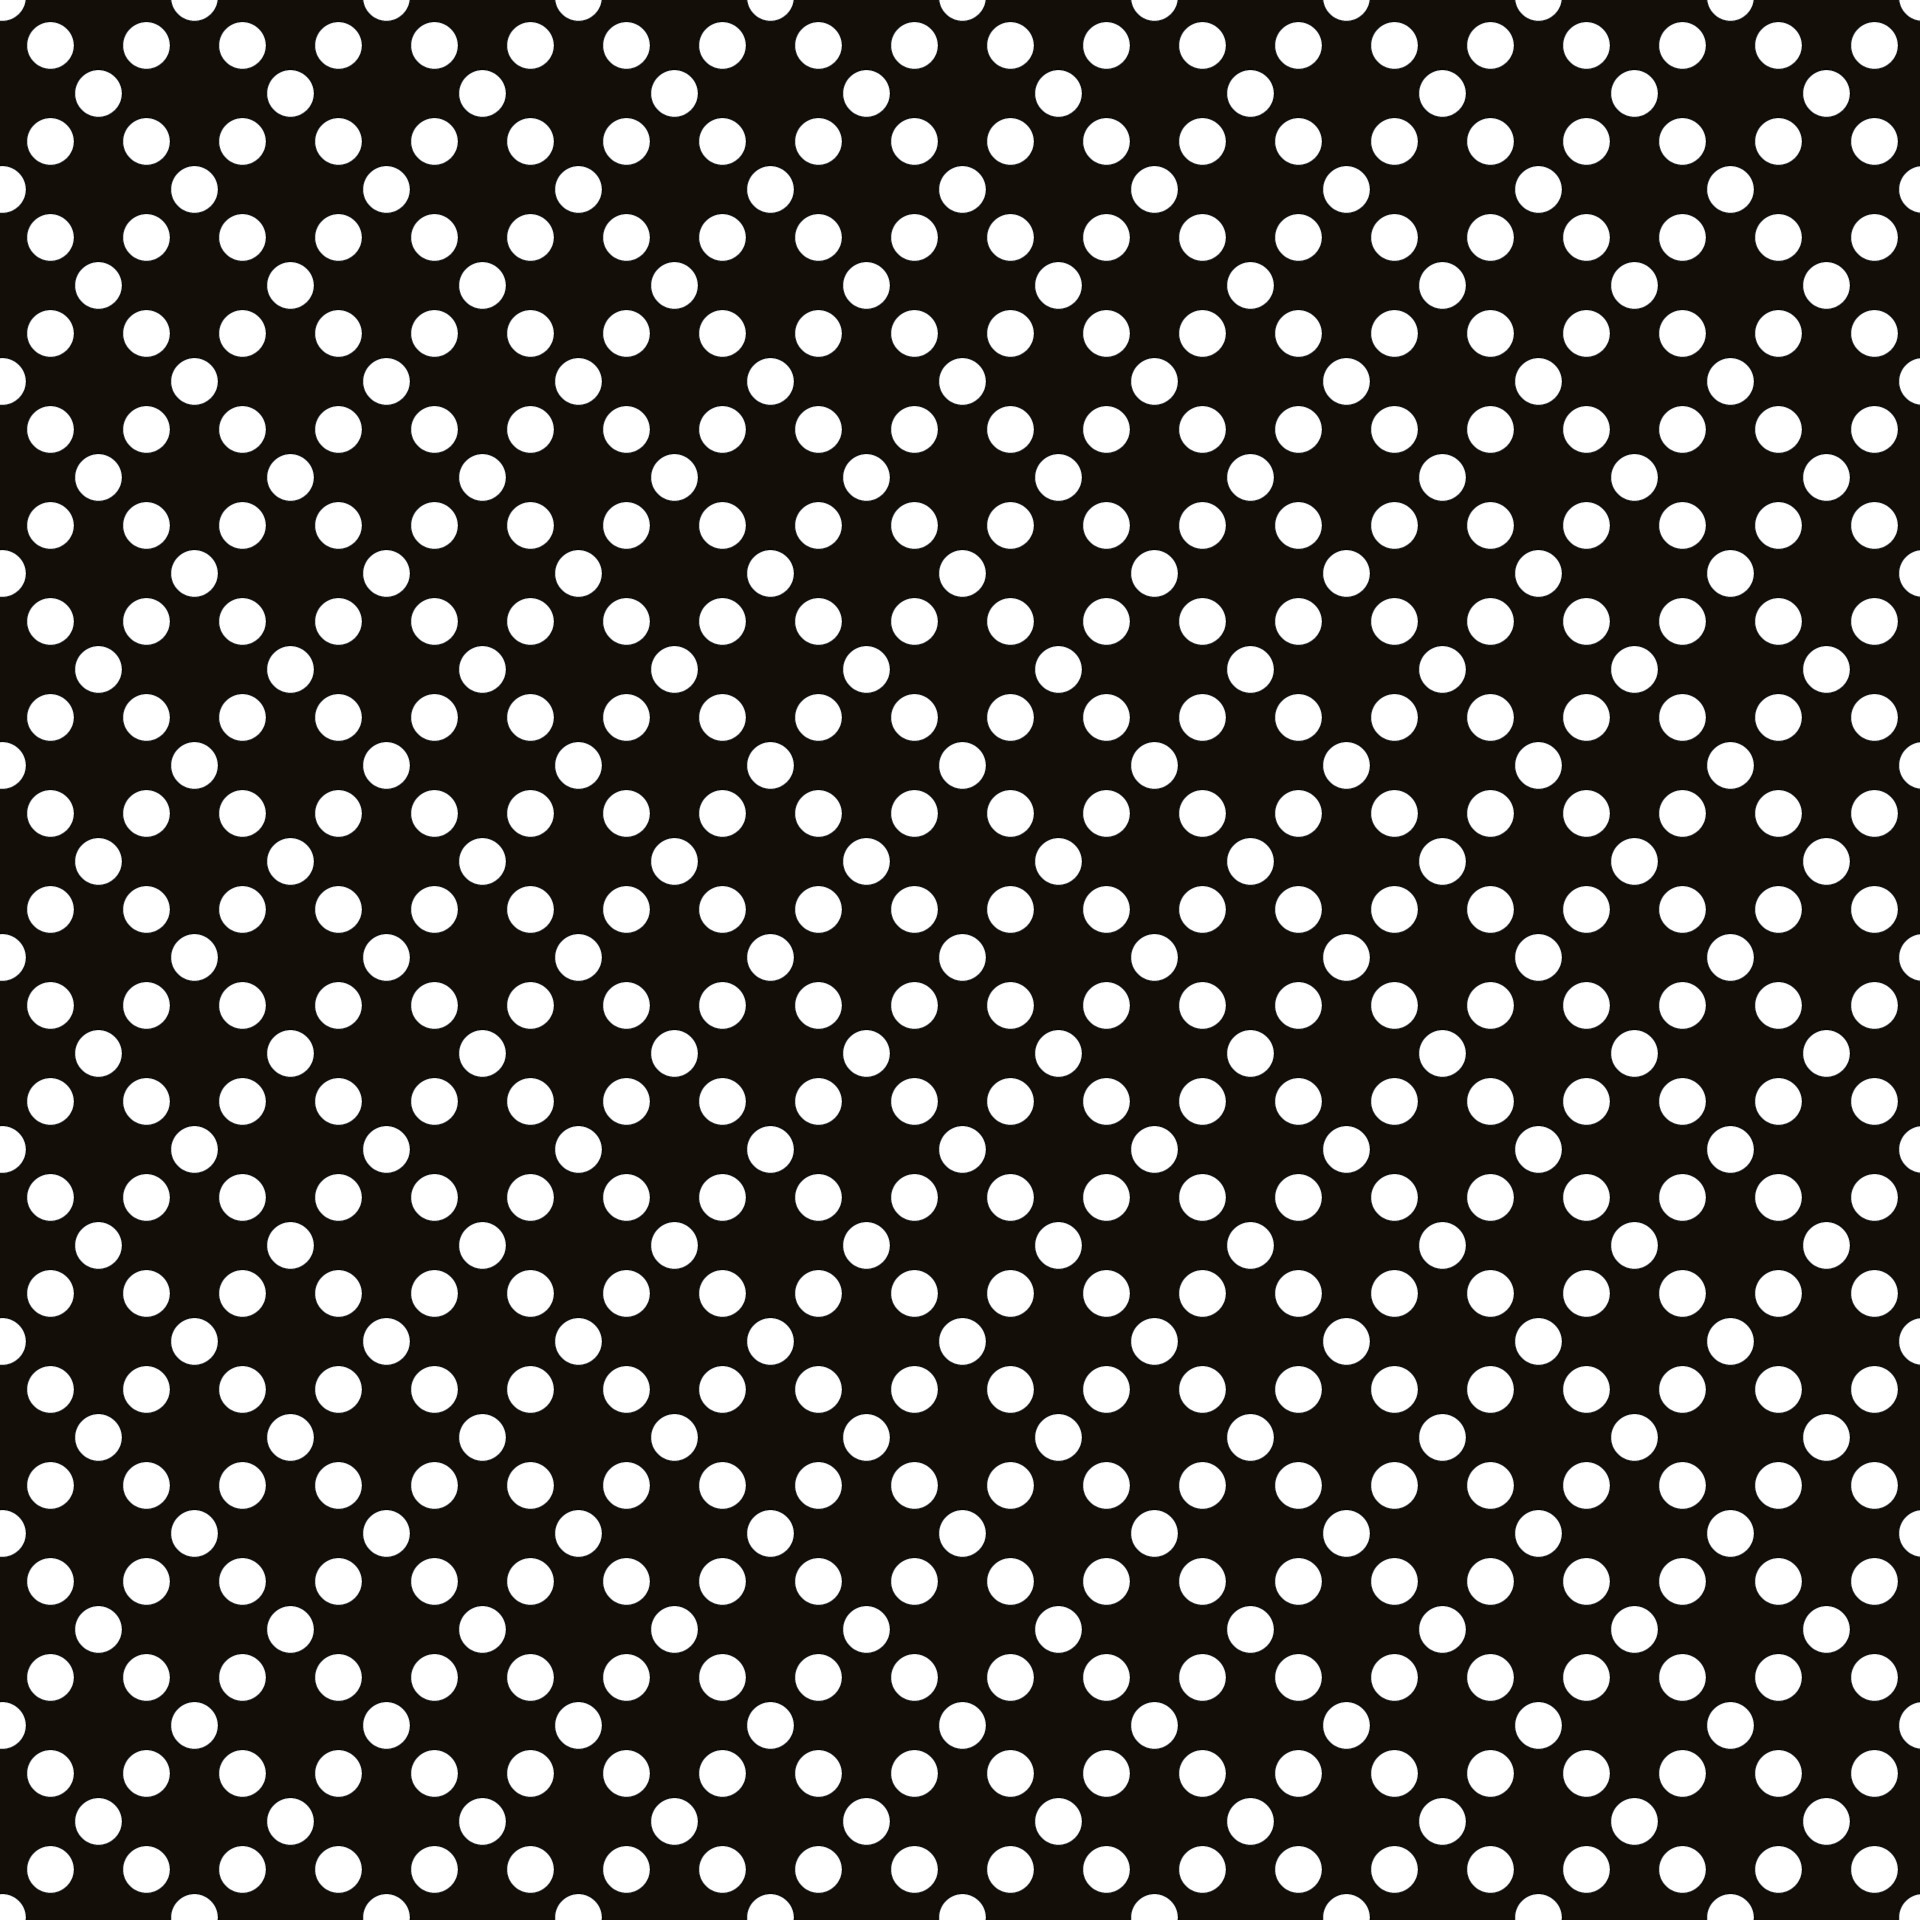 Abstract black and white polka dot pattern 14138972 Vector Art at Vecteezy